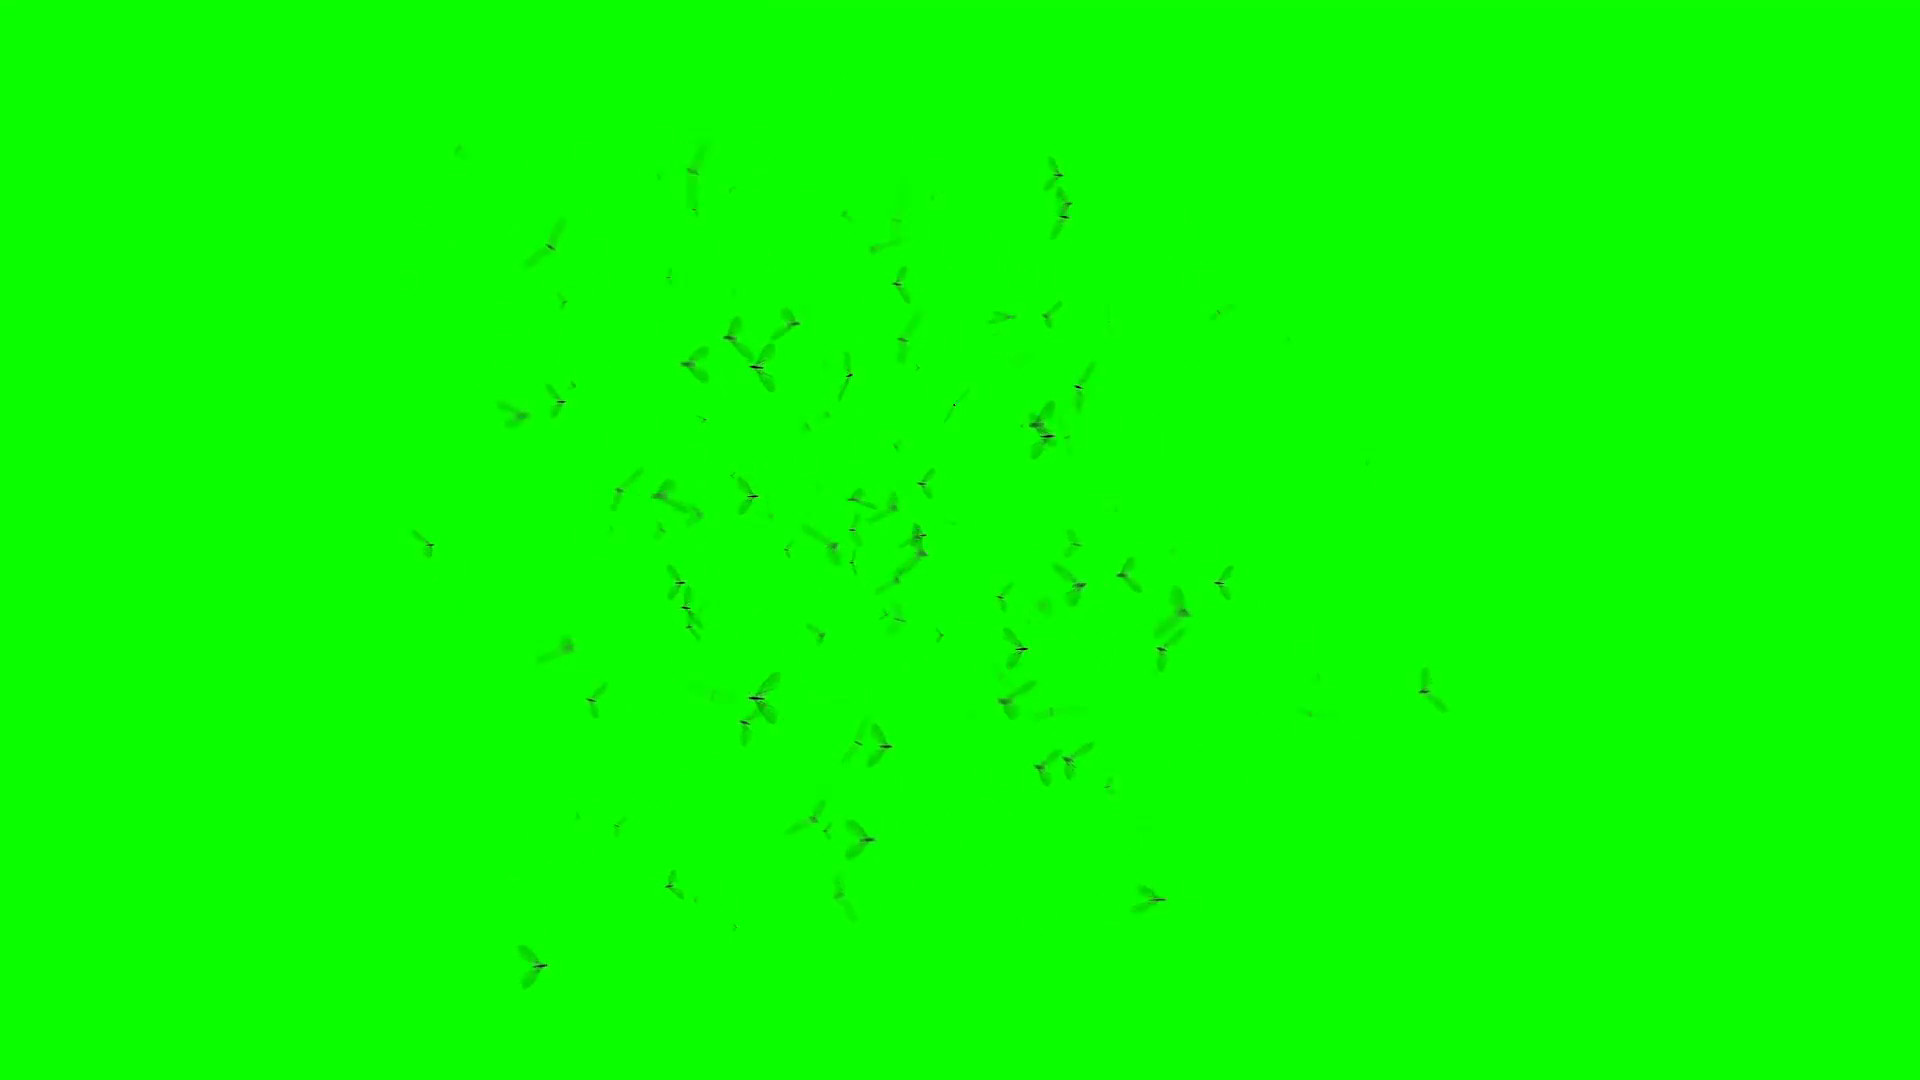 1920x1080, Swarm Of Flying Insects With Camera Movement - Green Background For Editing - HD Wallpaper 